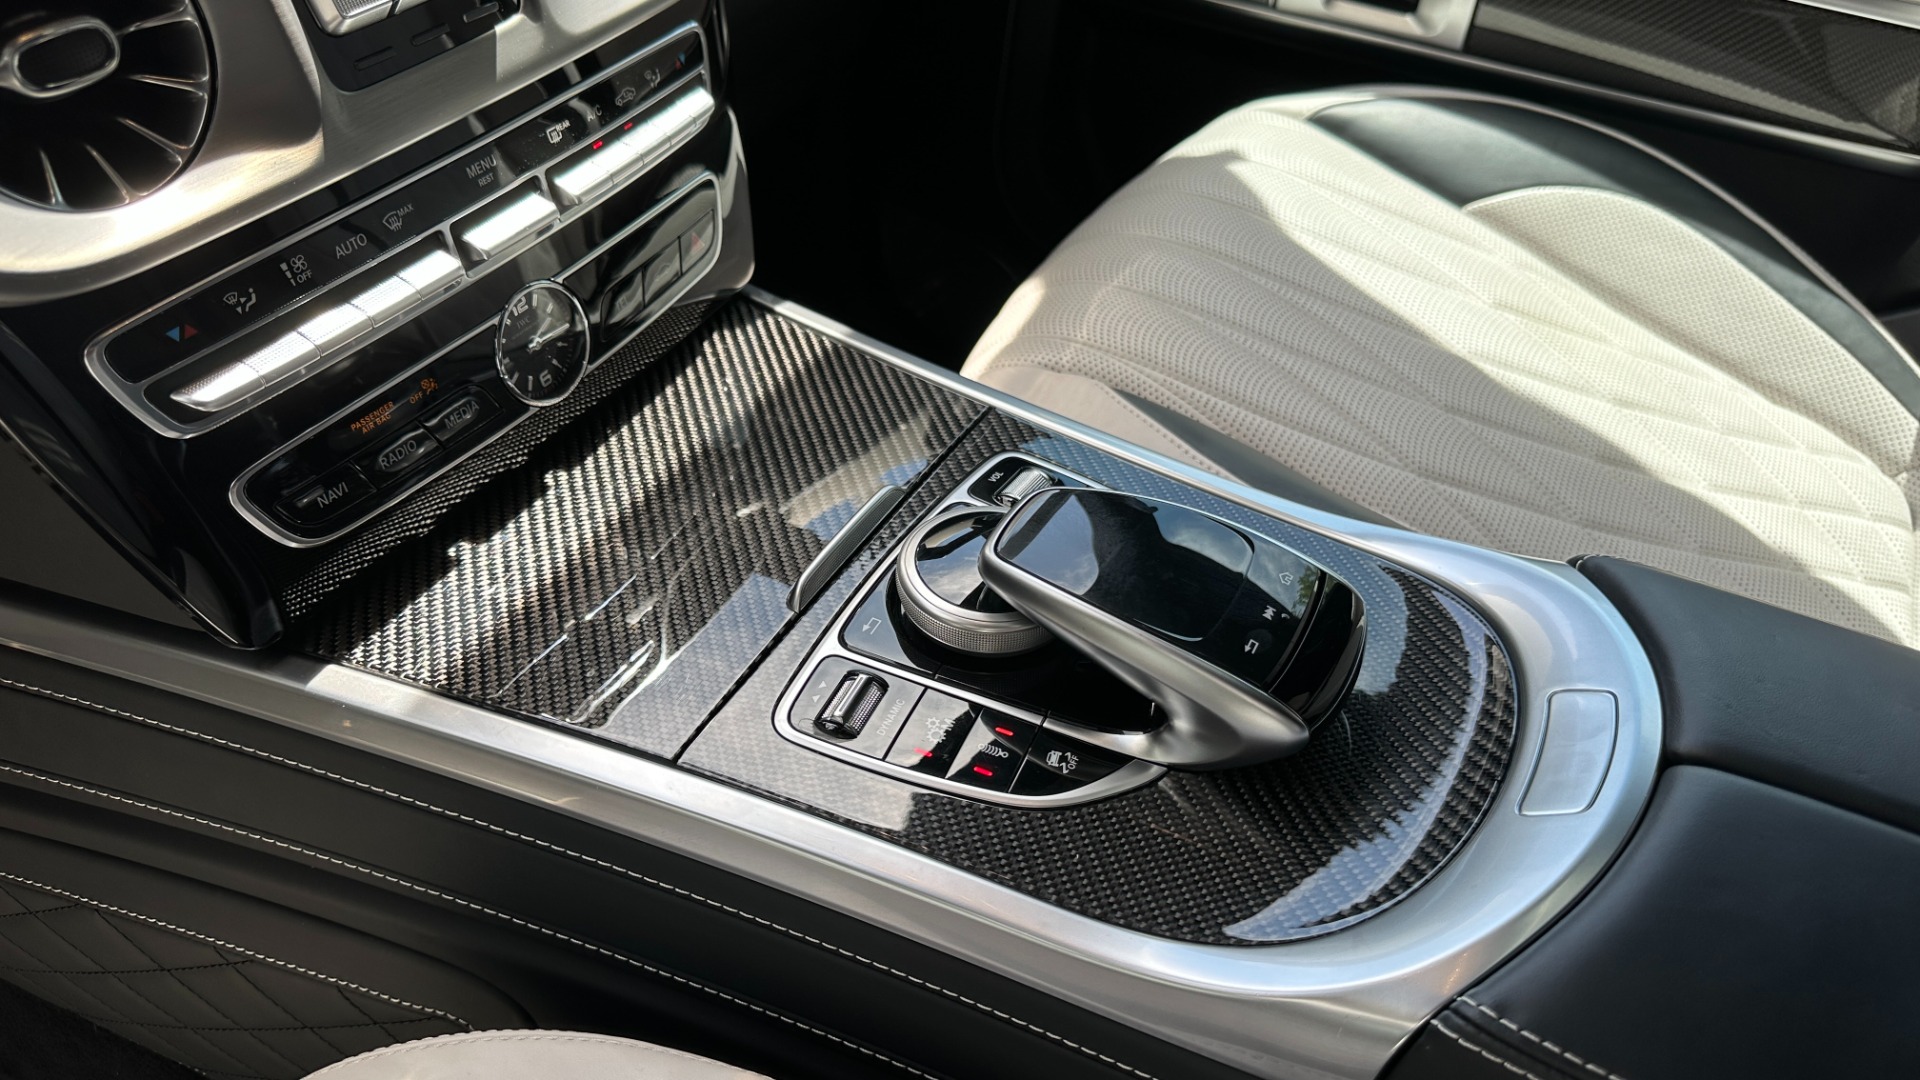 Used 2020 Mercedes-Benz G-Class AMG G63 DESIGNO INTERIOR / AMG NIGHT PKG / CARBON FIBER TRIM for sale $165,999 at Formula Imports in Charlotte NC 28227 30